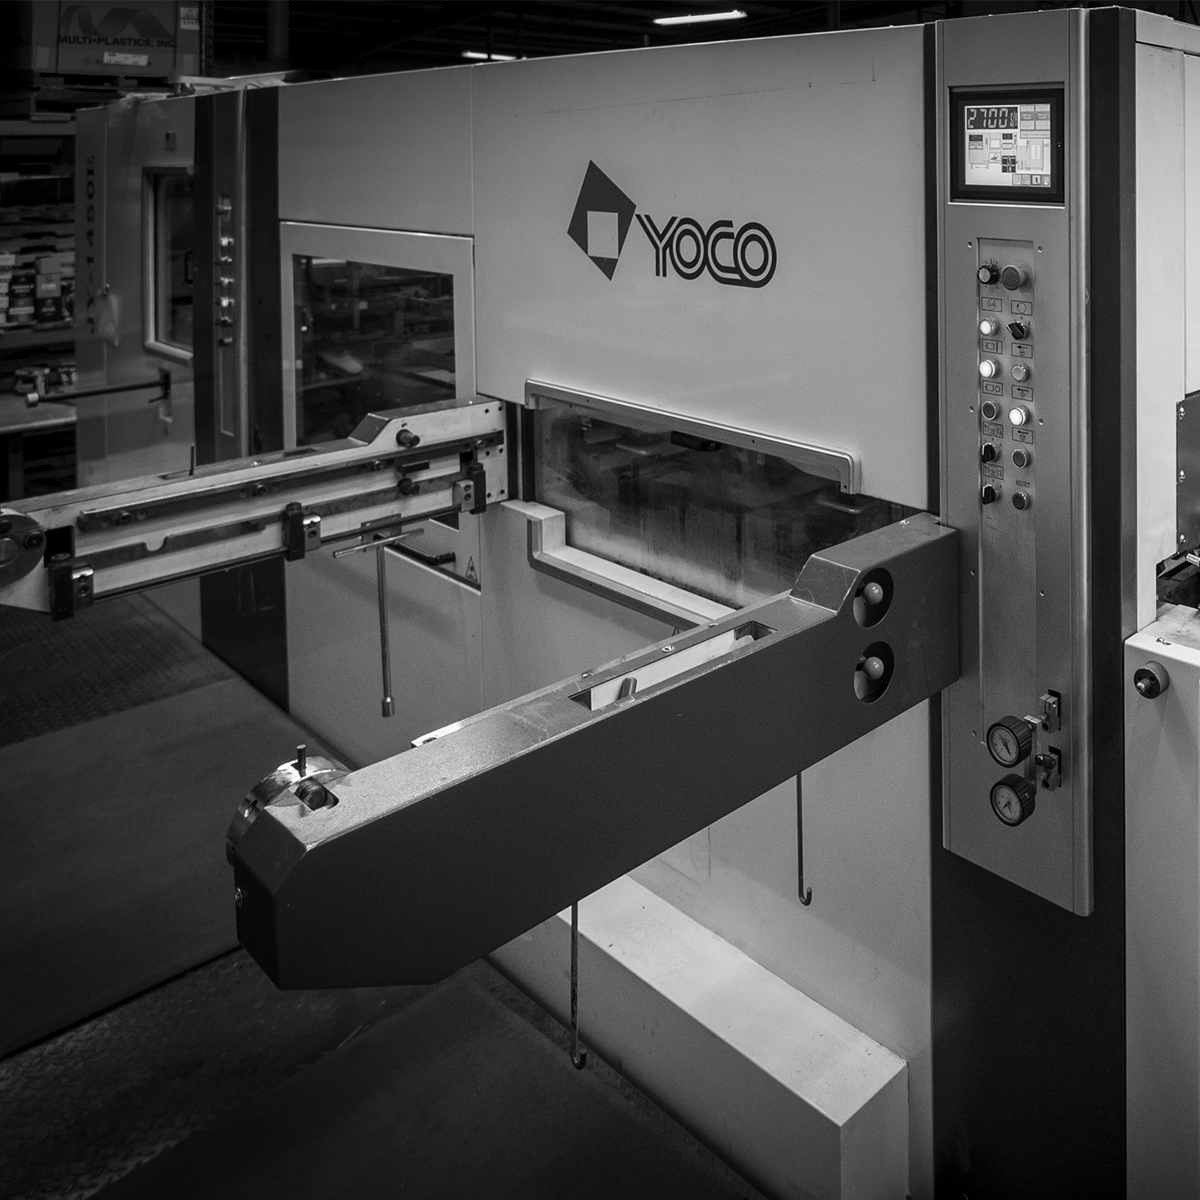 Die cutting operations, featuring a Yoco JY-1650E Automated Die Cutter